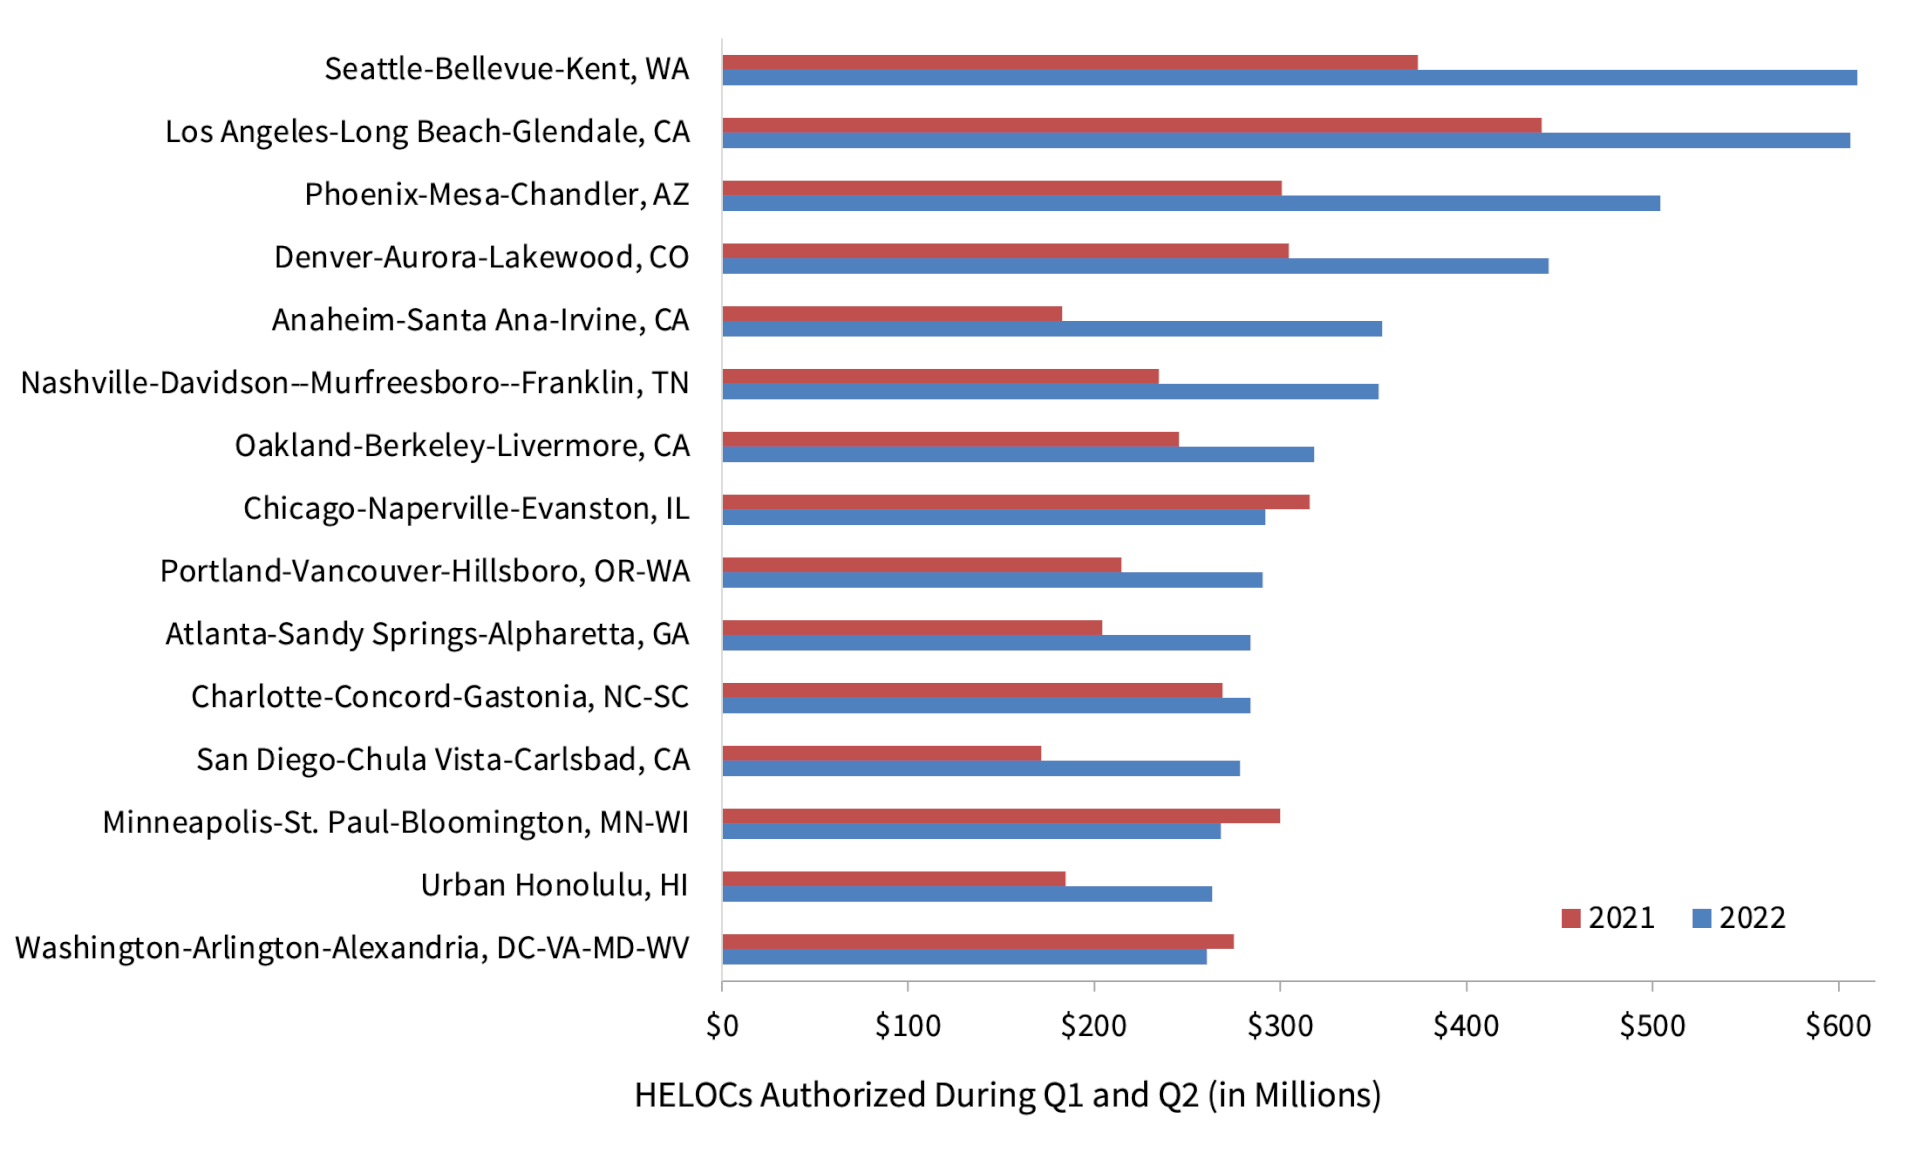 Figure 2: Top 15 Metros with Highest Amount of Approved HELOCs: Q1 and Q2 2022